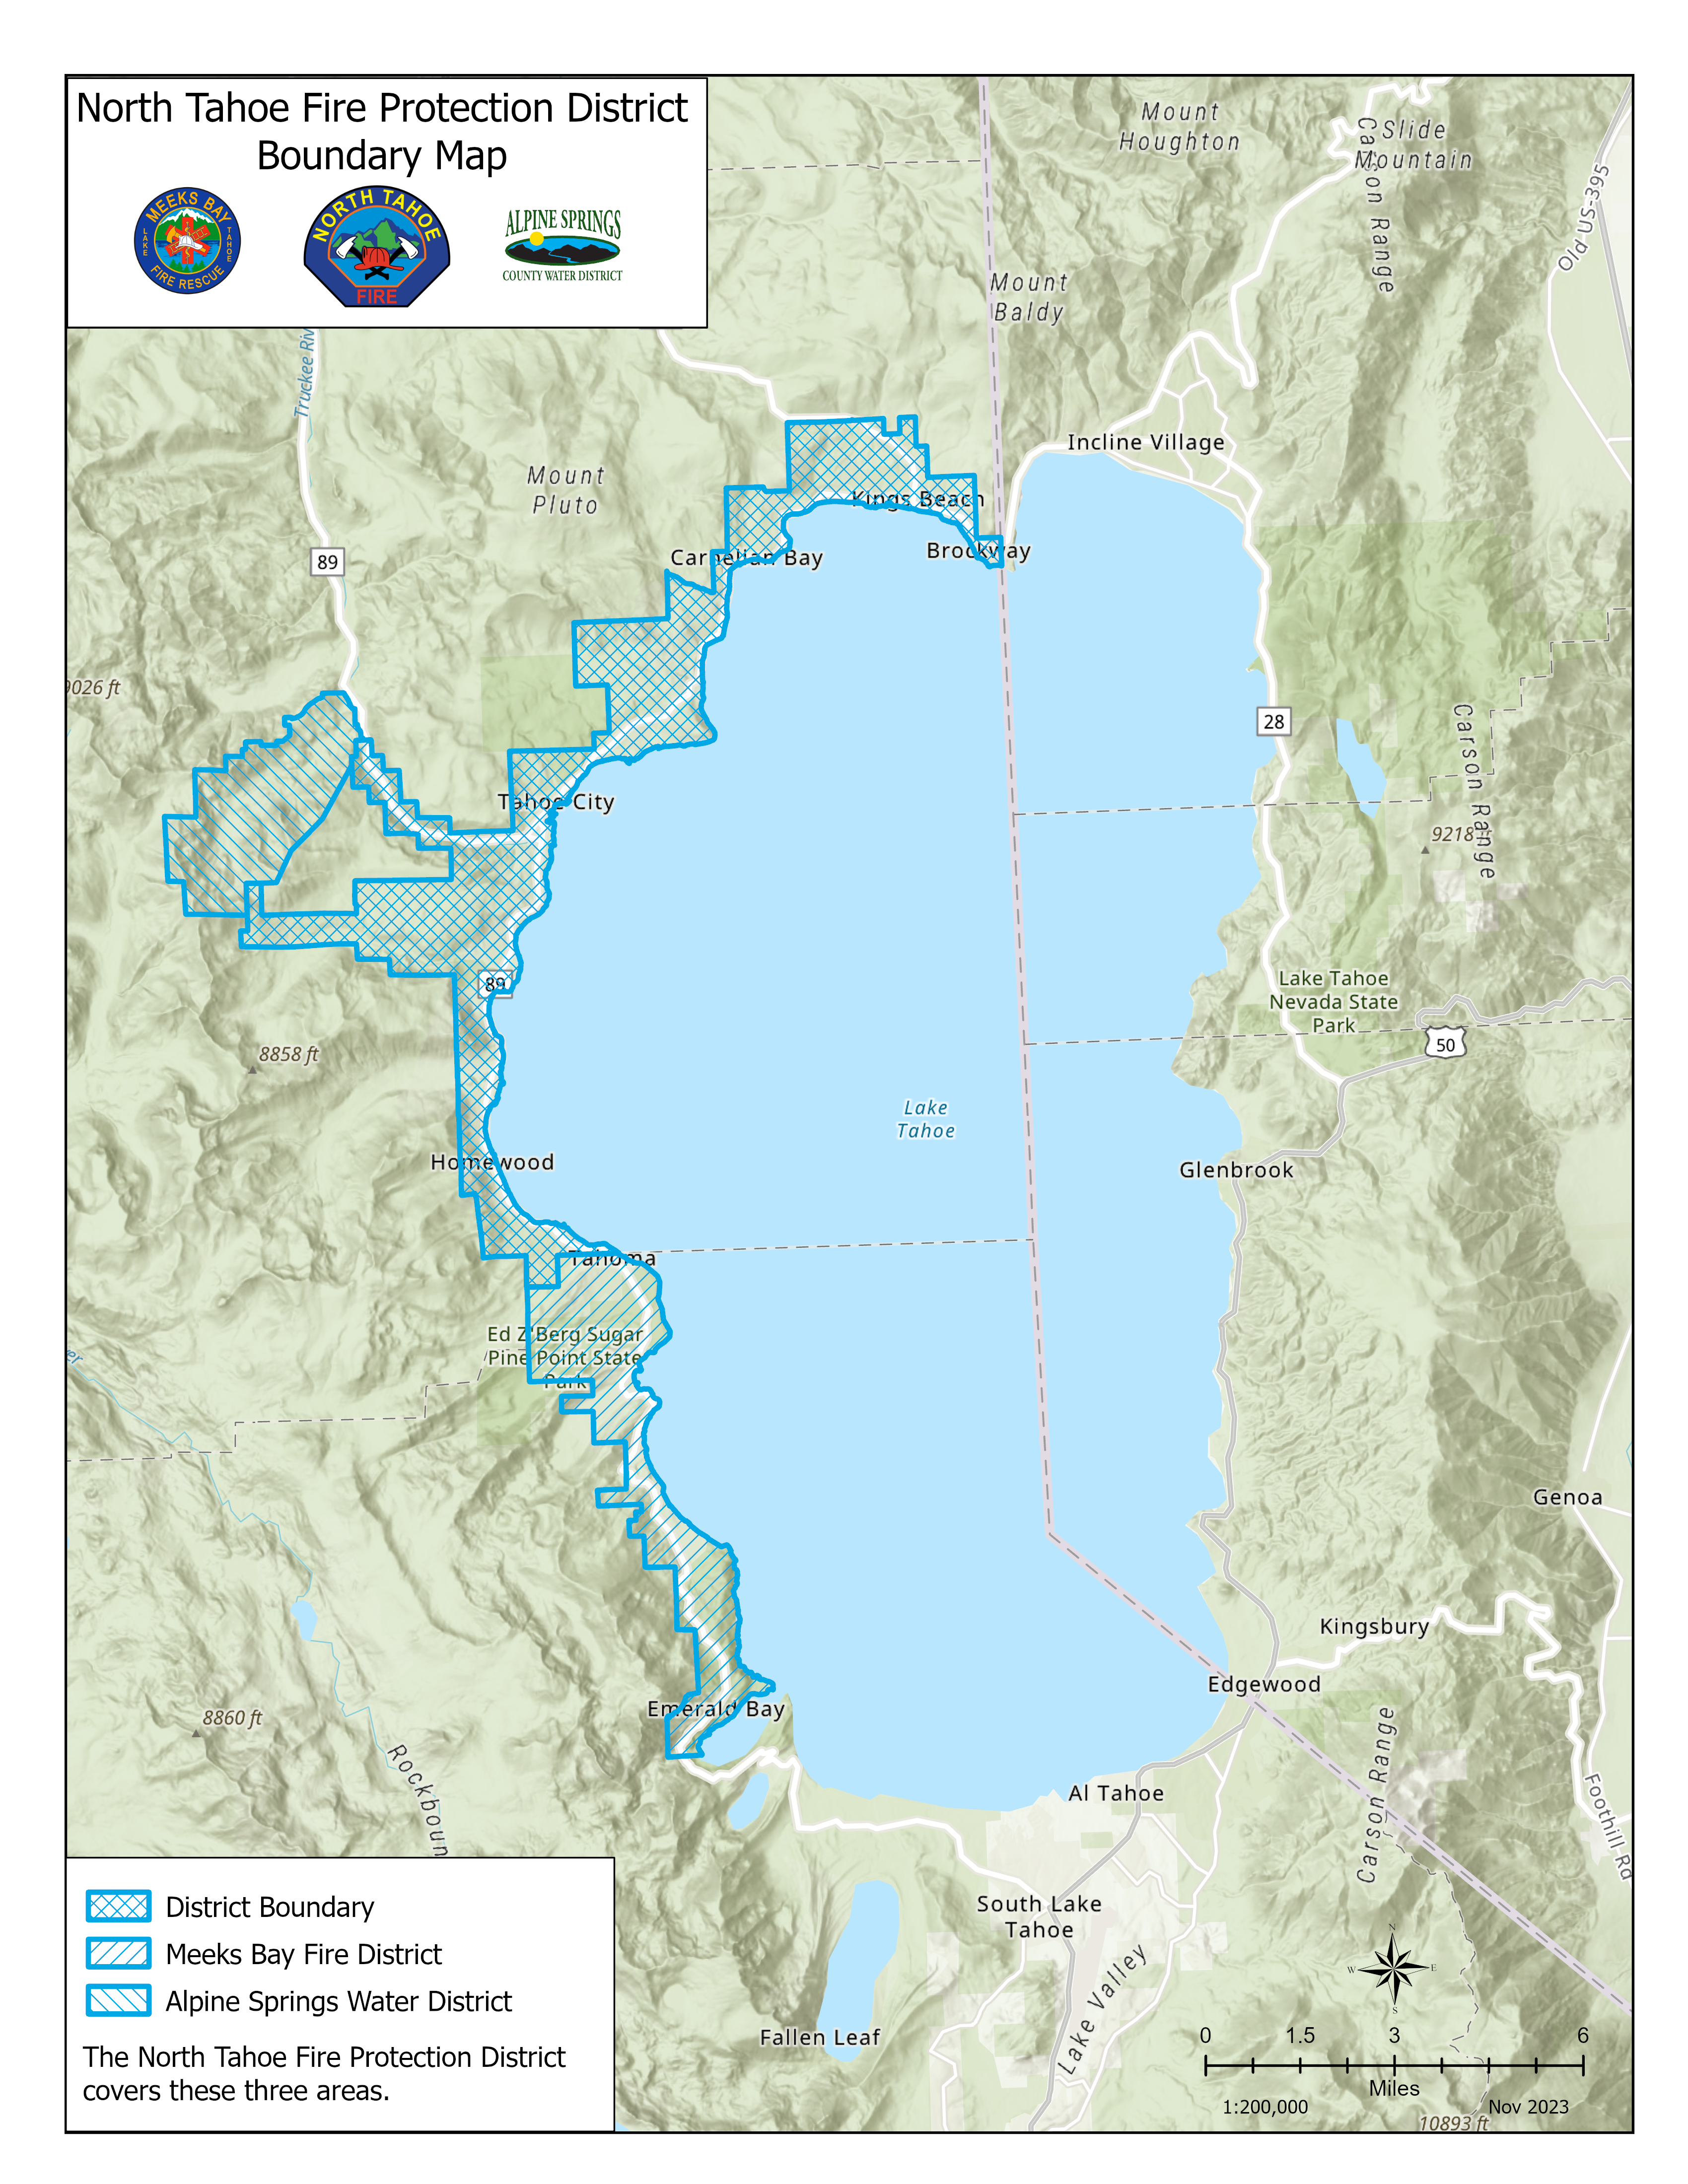 North Tahoe Fire Boundary Map